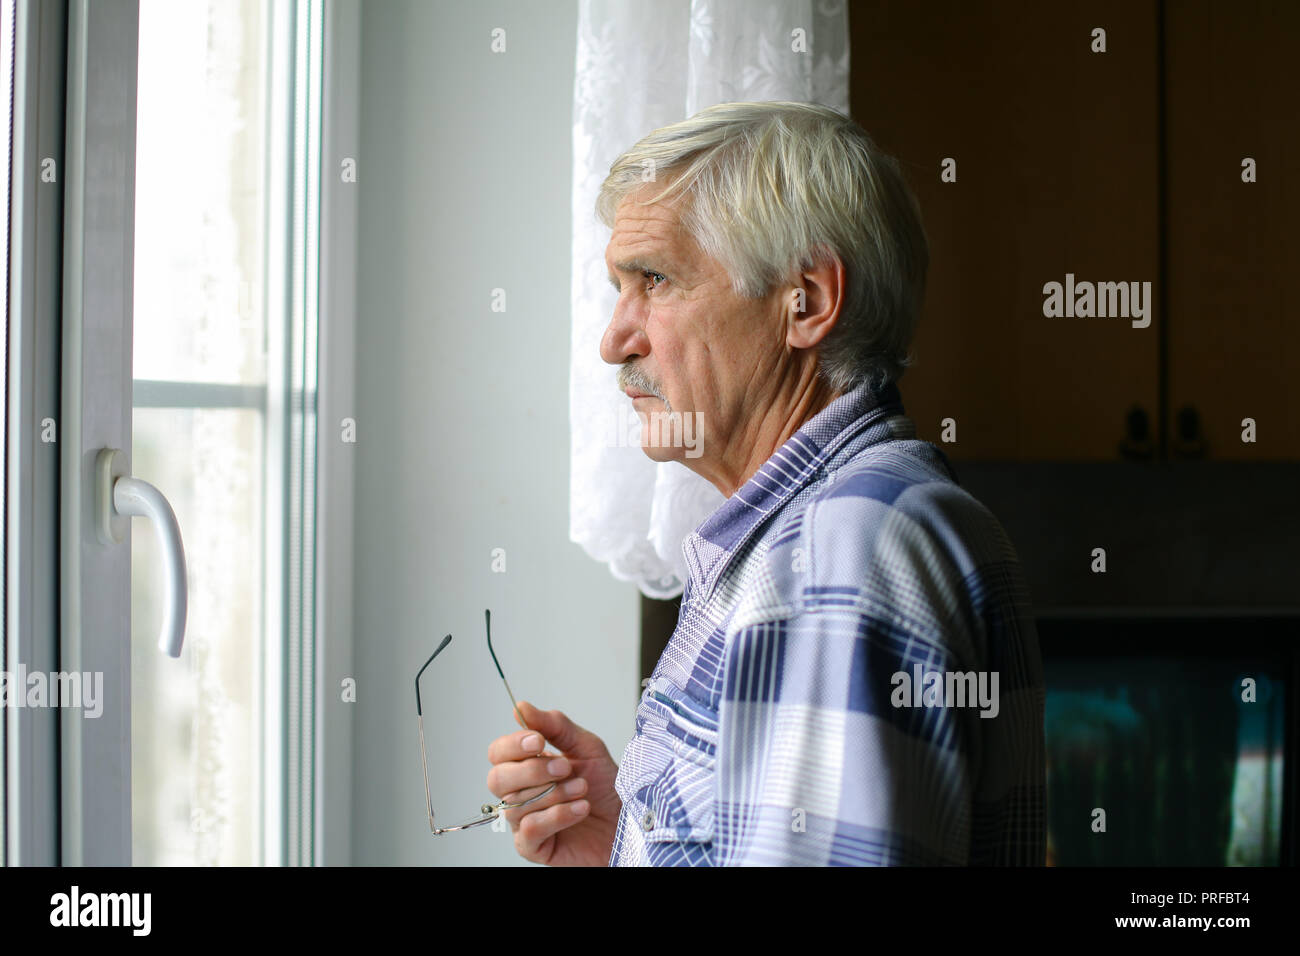 portrait of a gray-haired man 60 years old. A man looks out the window. The man has poor eyesight, he wears glasses Stock Photo